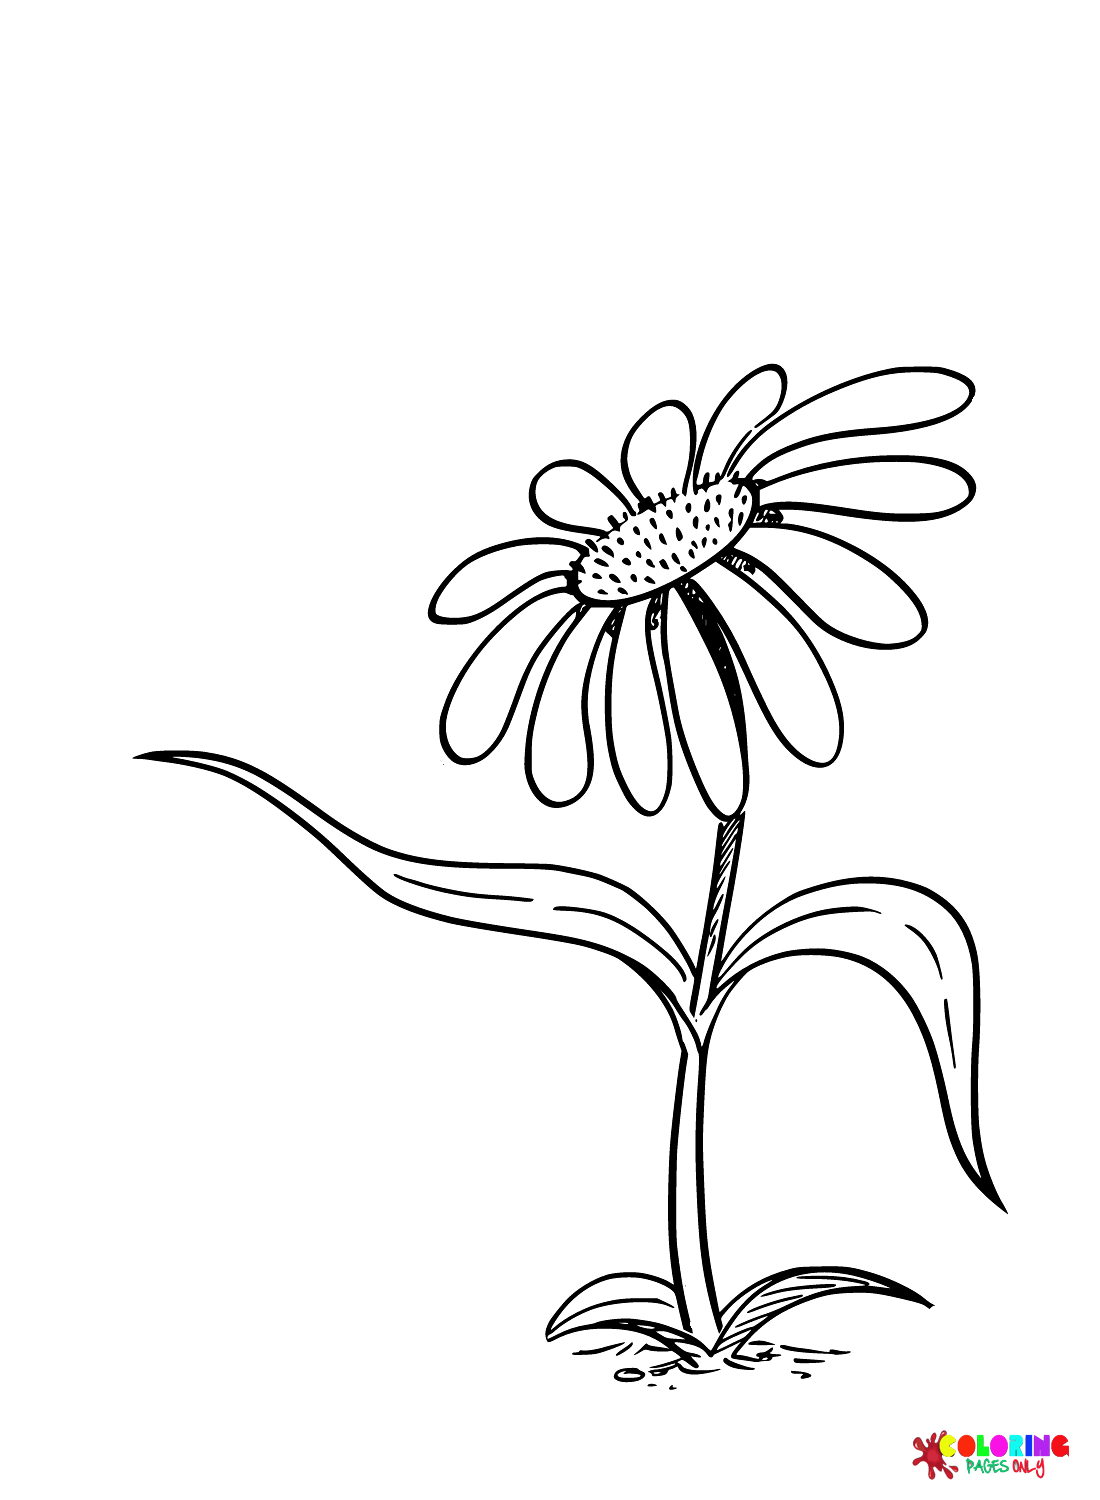 Lovely Daisy Coloring Page